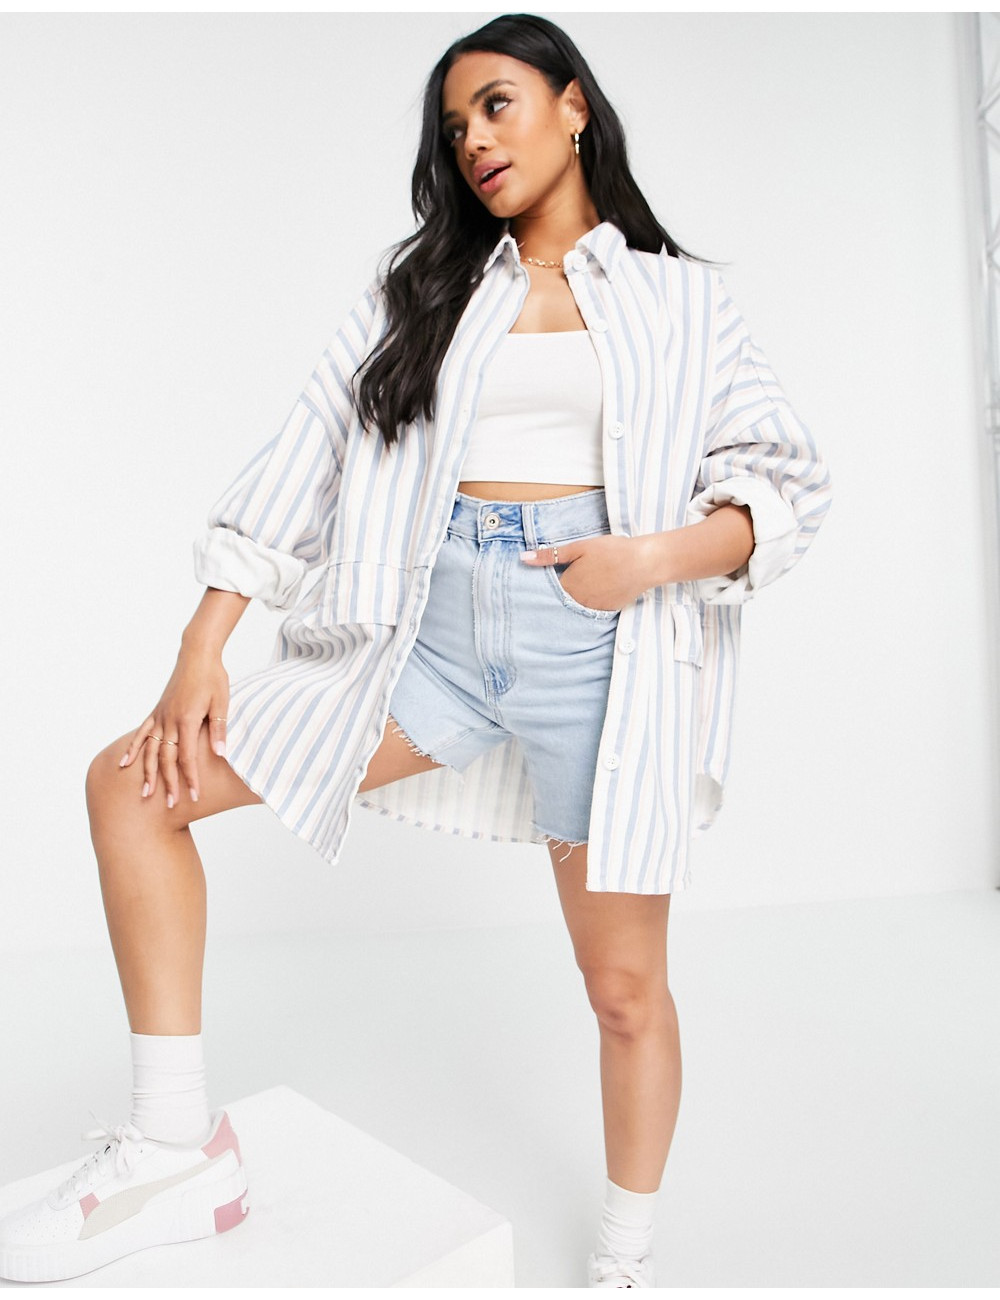 Missguided co-ord oversized...